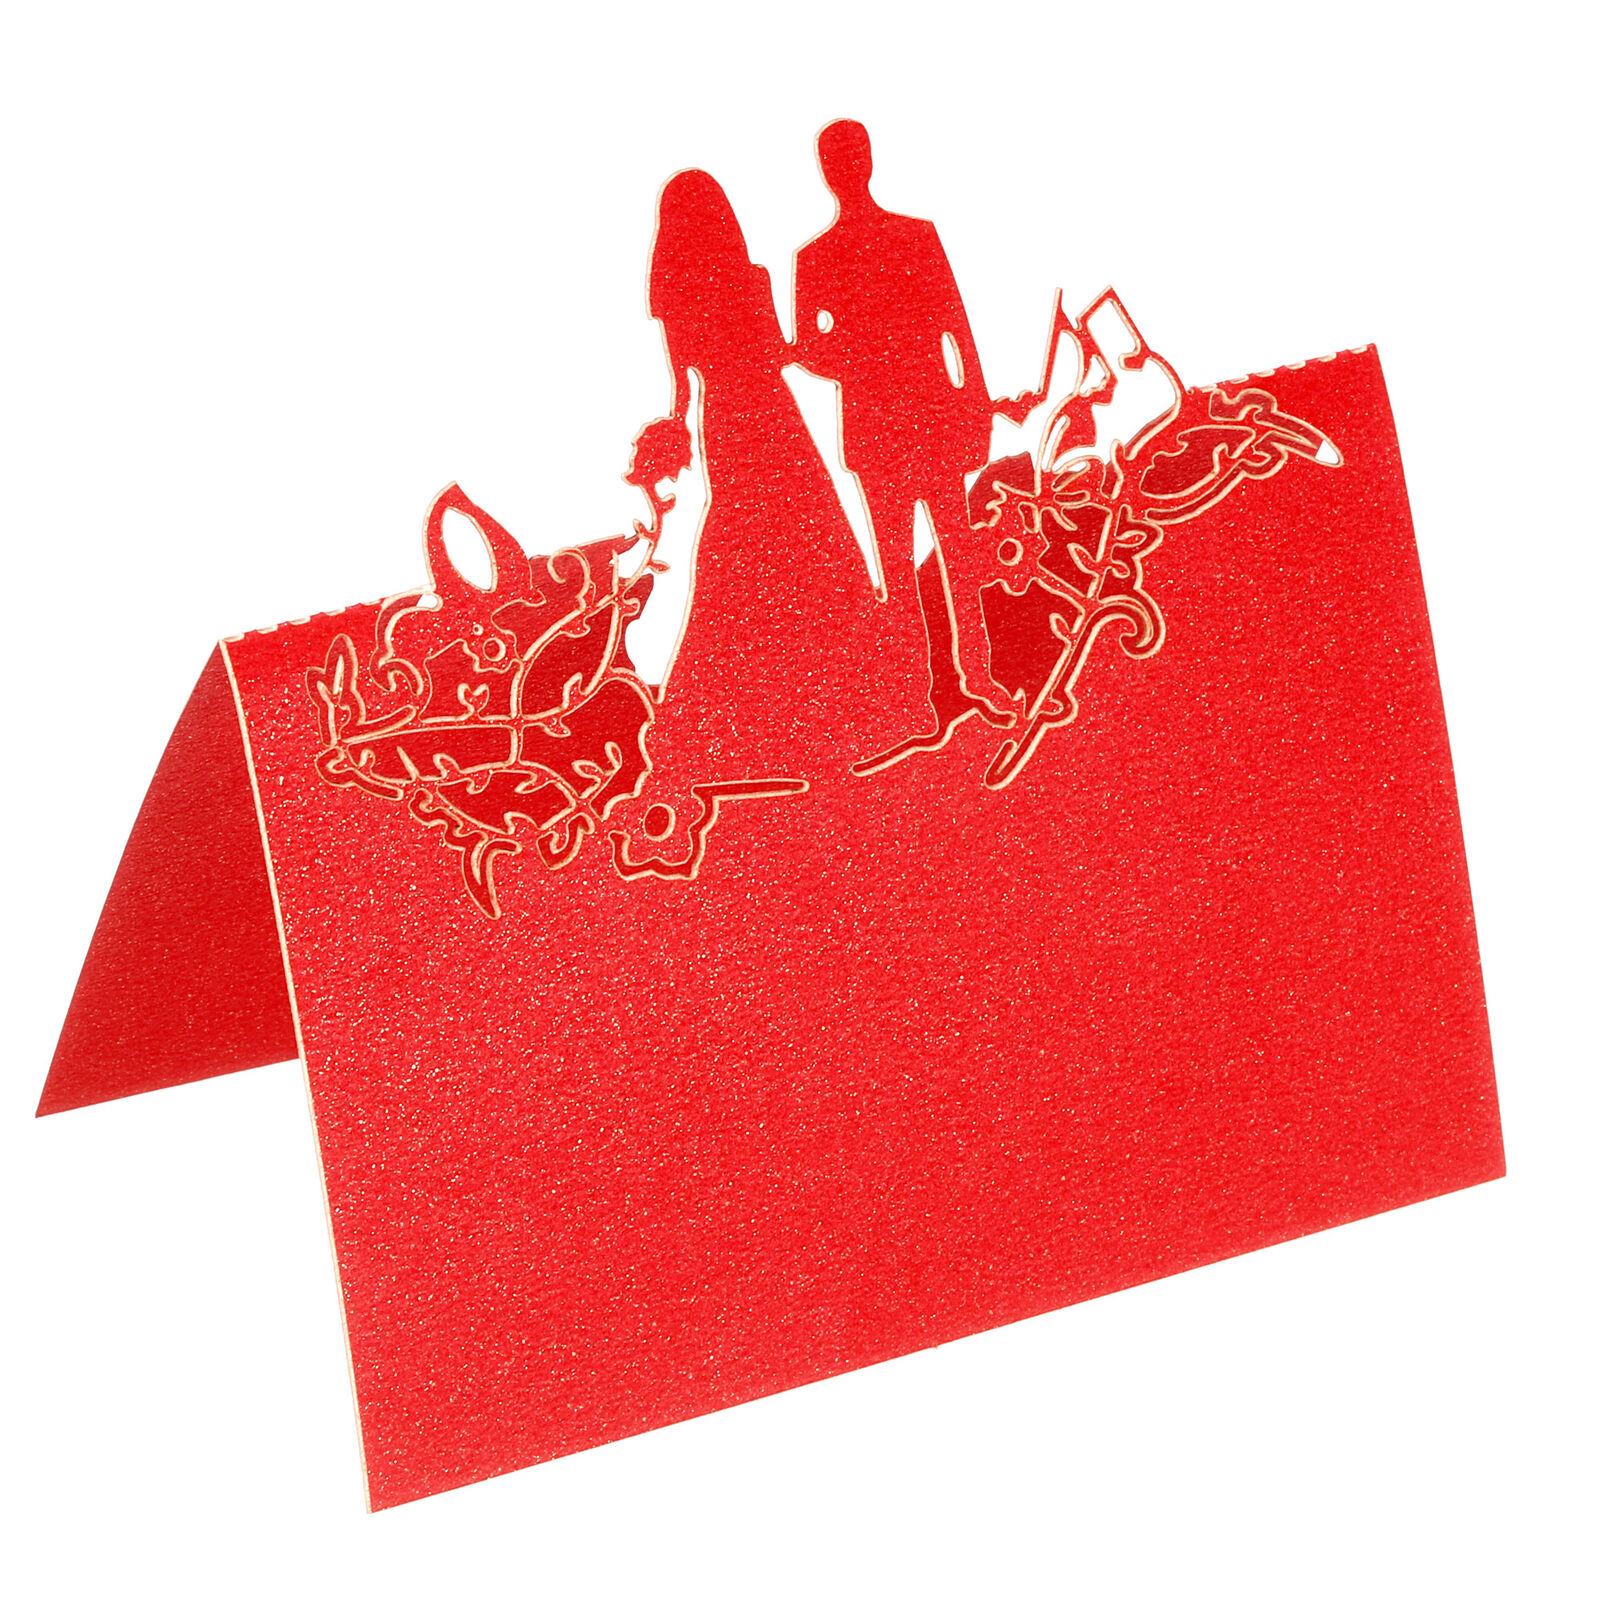 Table Name Place Cards,50Pcs Hollow People Cut Design Blank Card Red